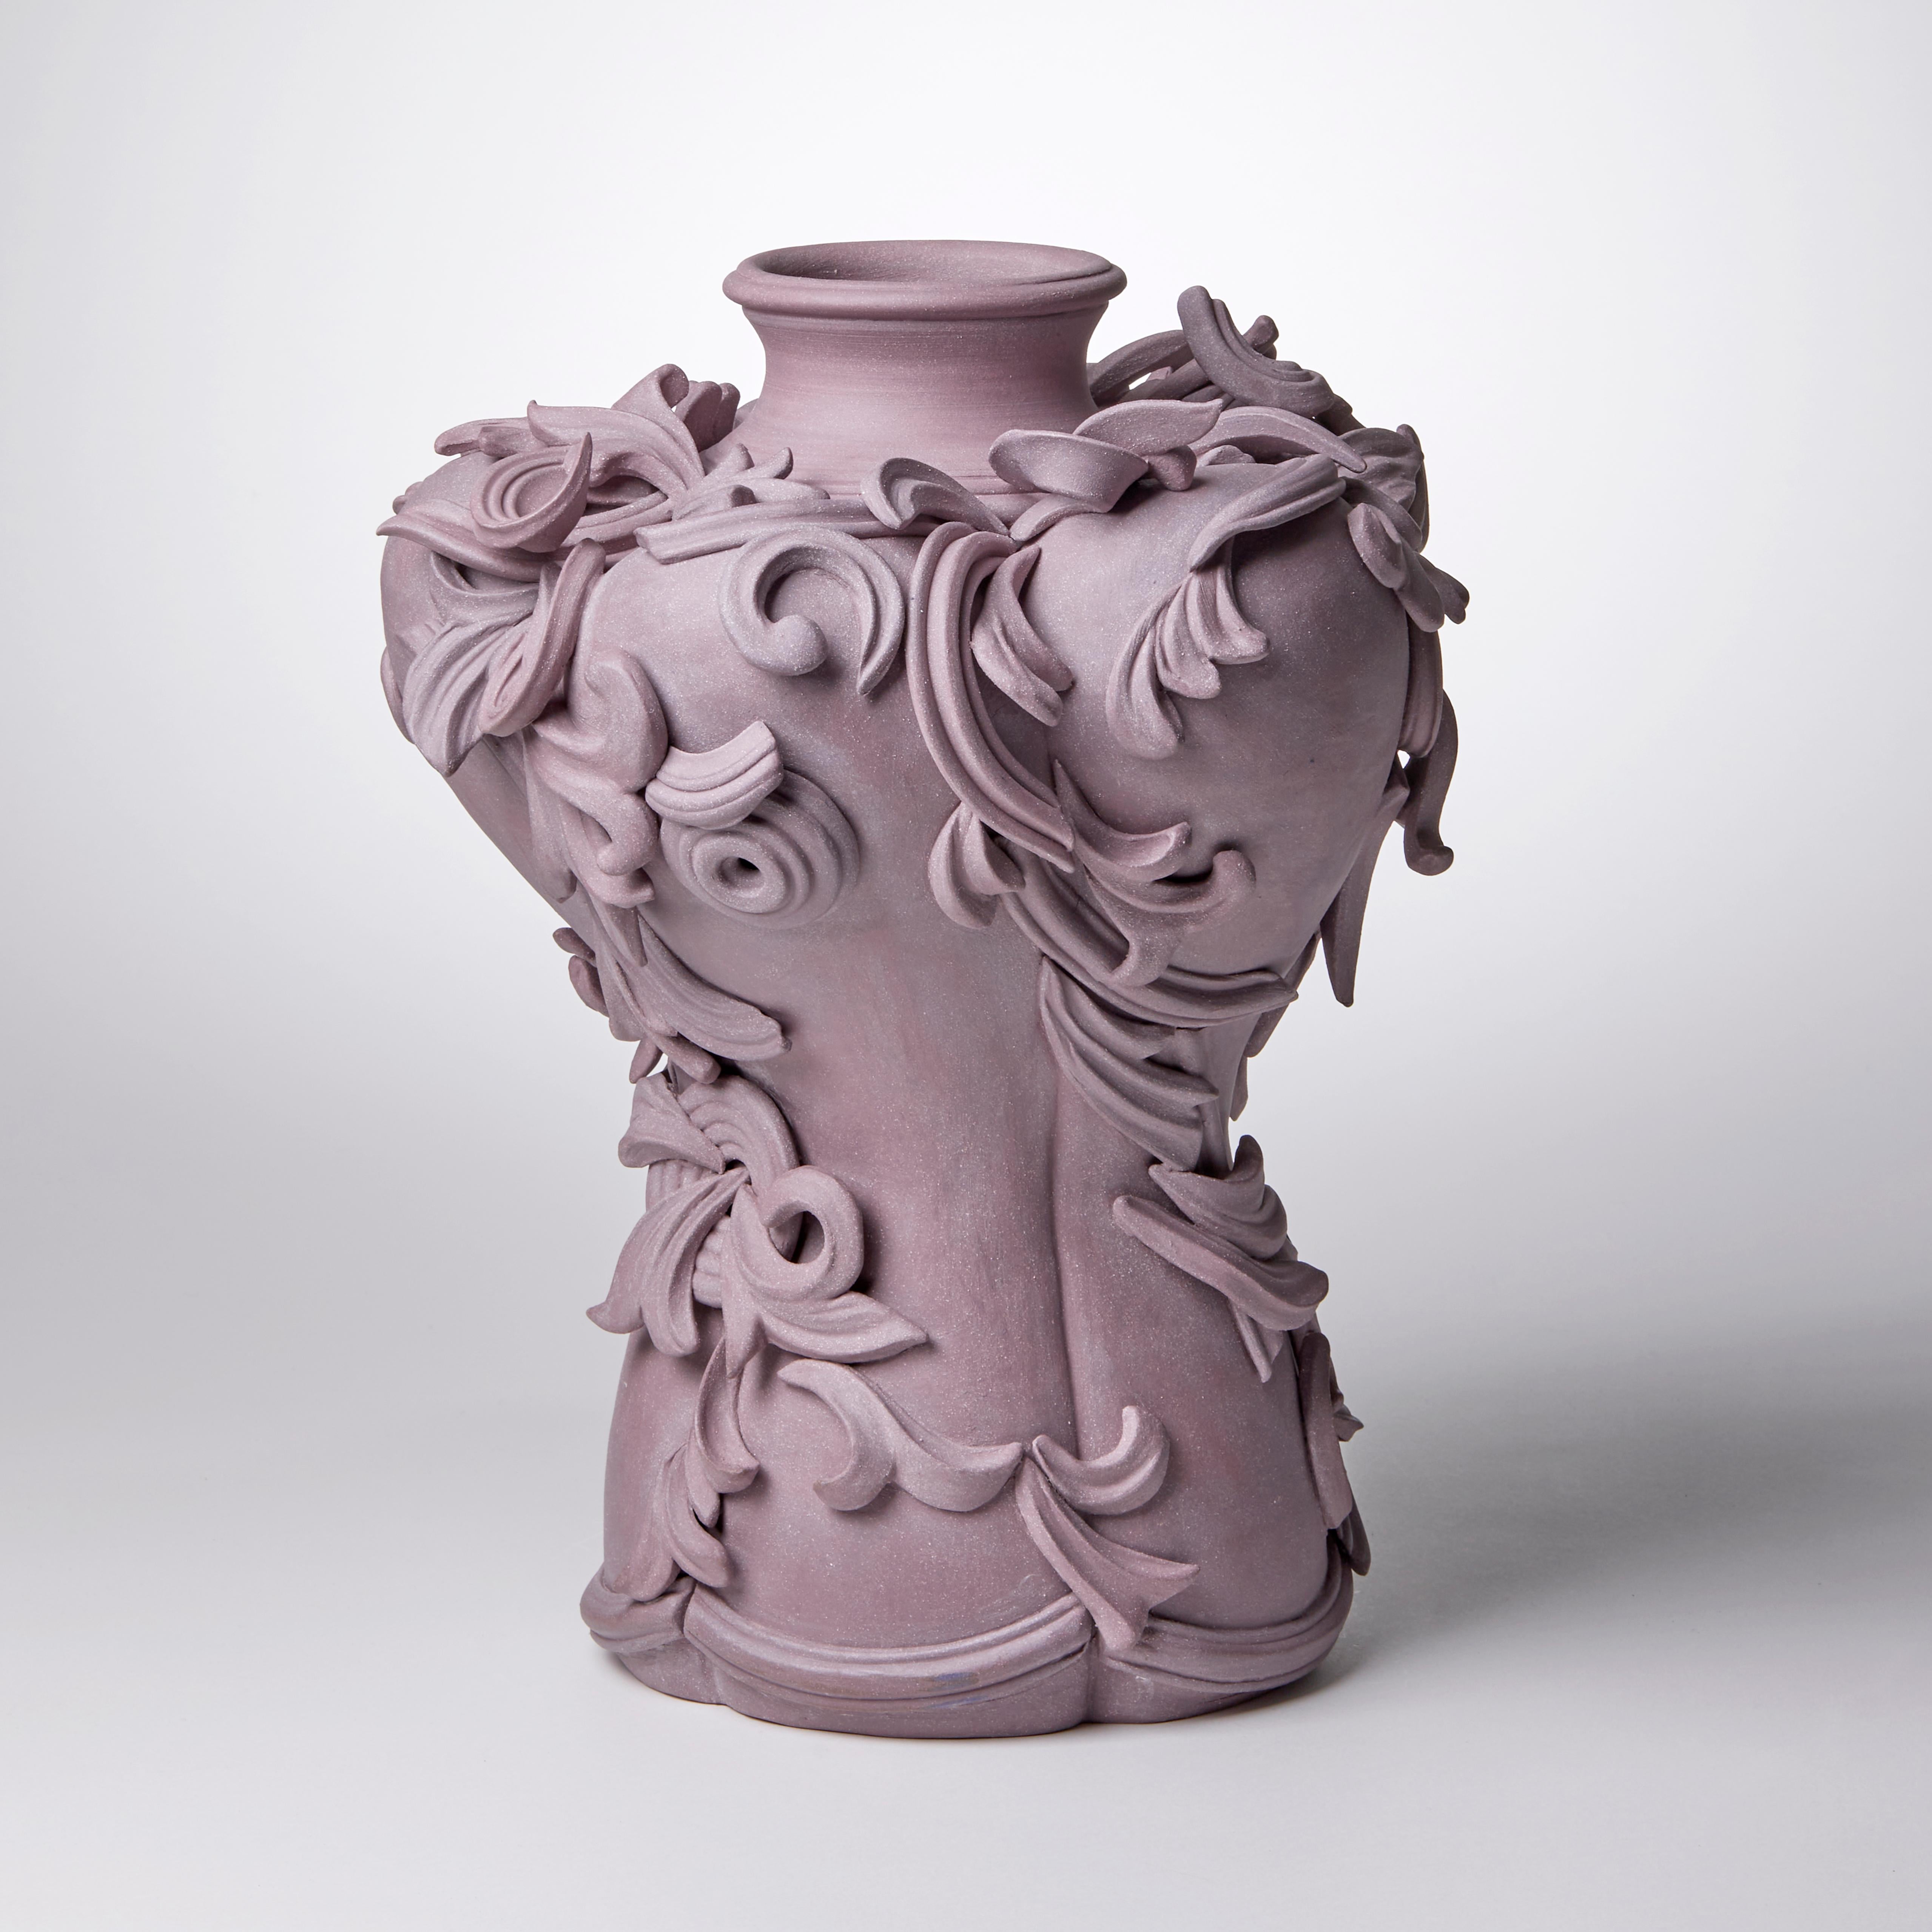 Vari Capitelli VIII is a unique handmade coloured stoneware ceramic sculptural vase in dusky damson & plum purples by the British artist Jo Taylor. The central form has been thrown on the potter's wheel and also hand-built, then adorned with